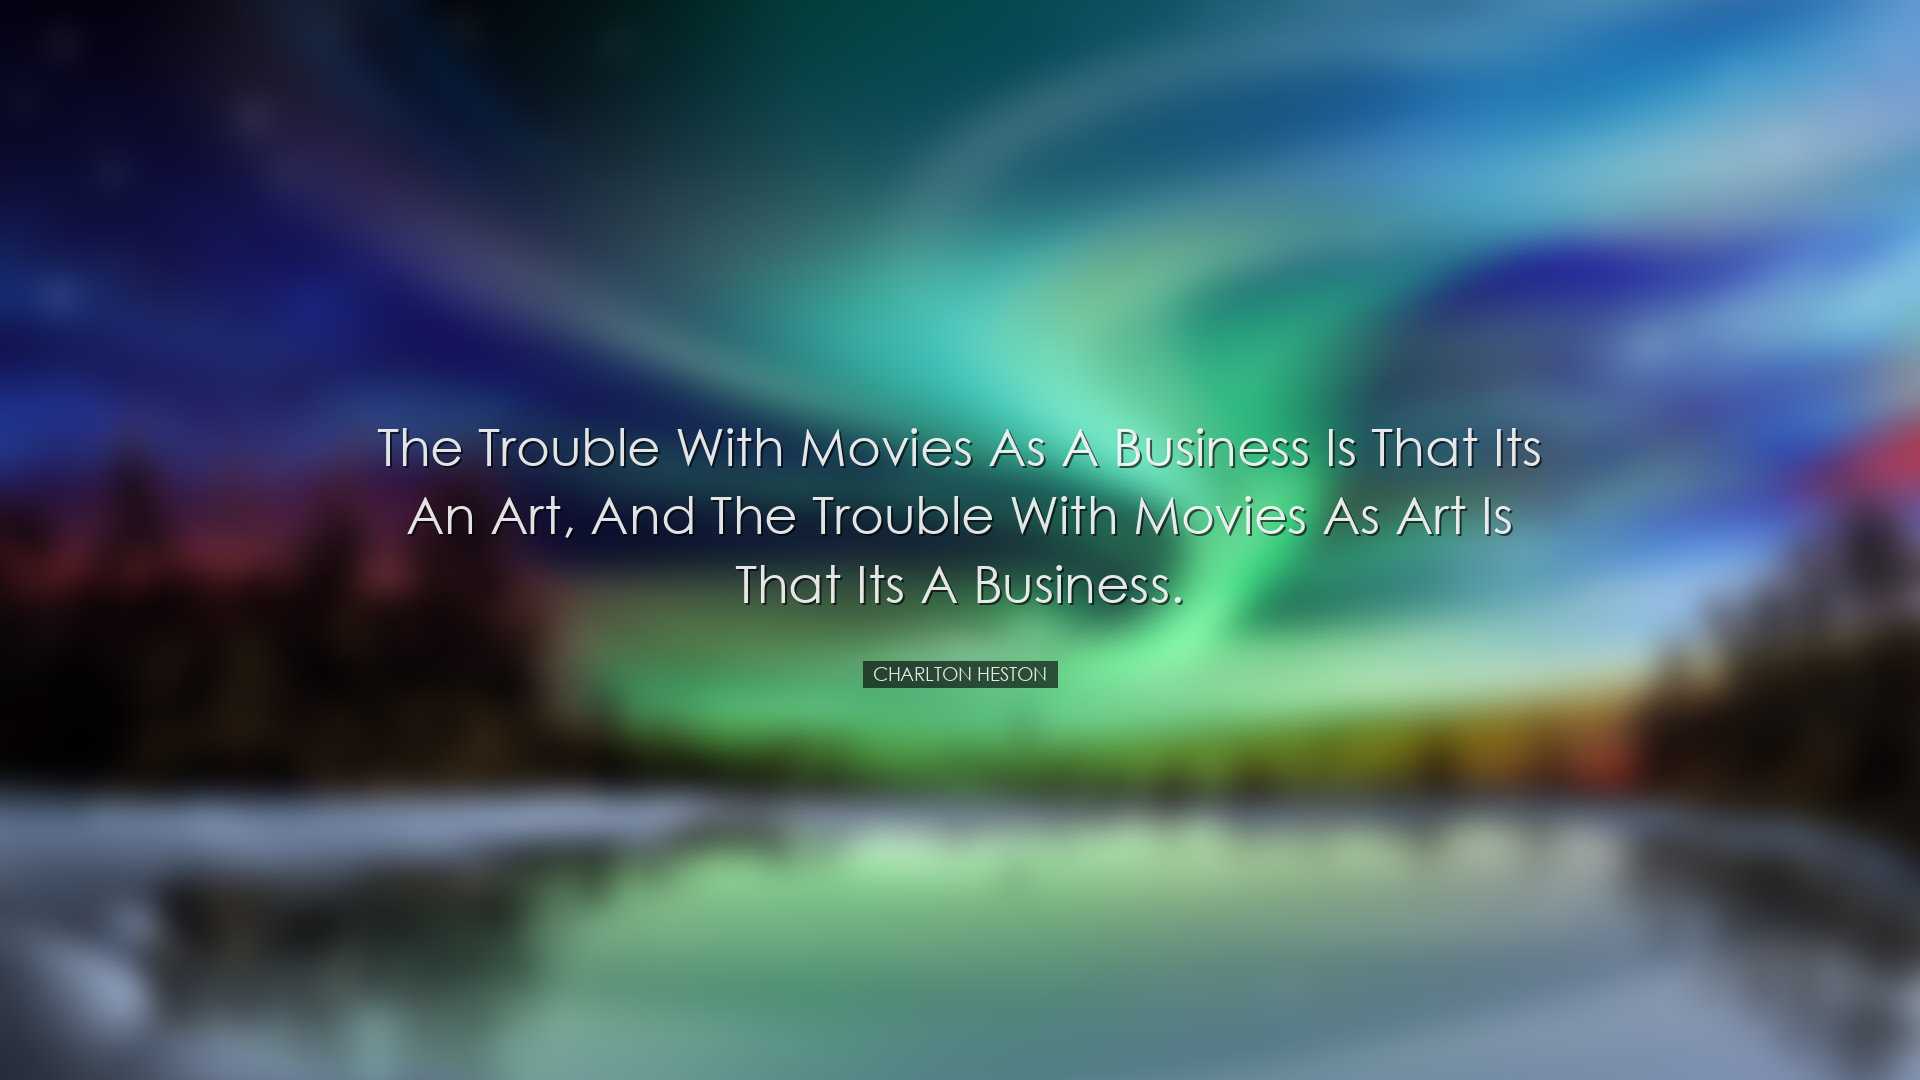 The trouble with movies as a business is that its an art, and the